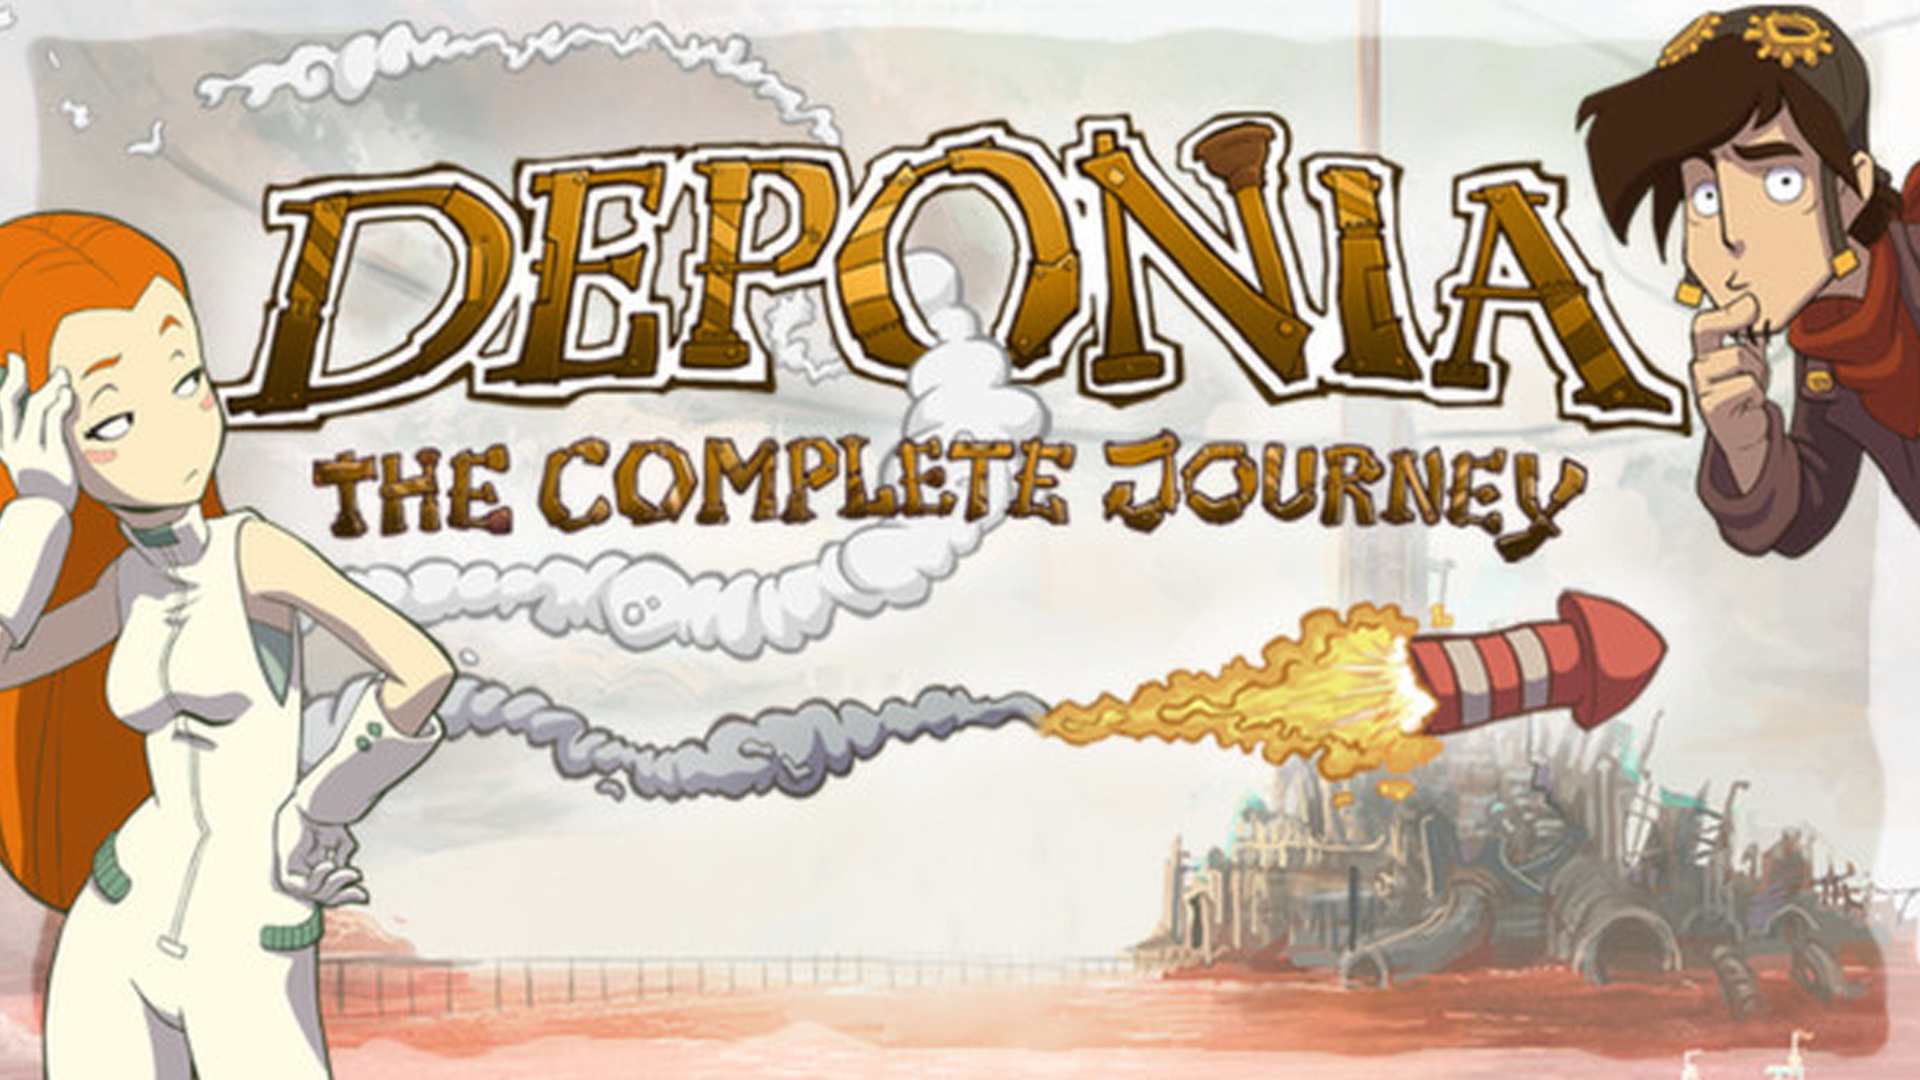 Deponia The Complete Journey: Free On The Epic Games Store, Dates & Information - Breakflip

